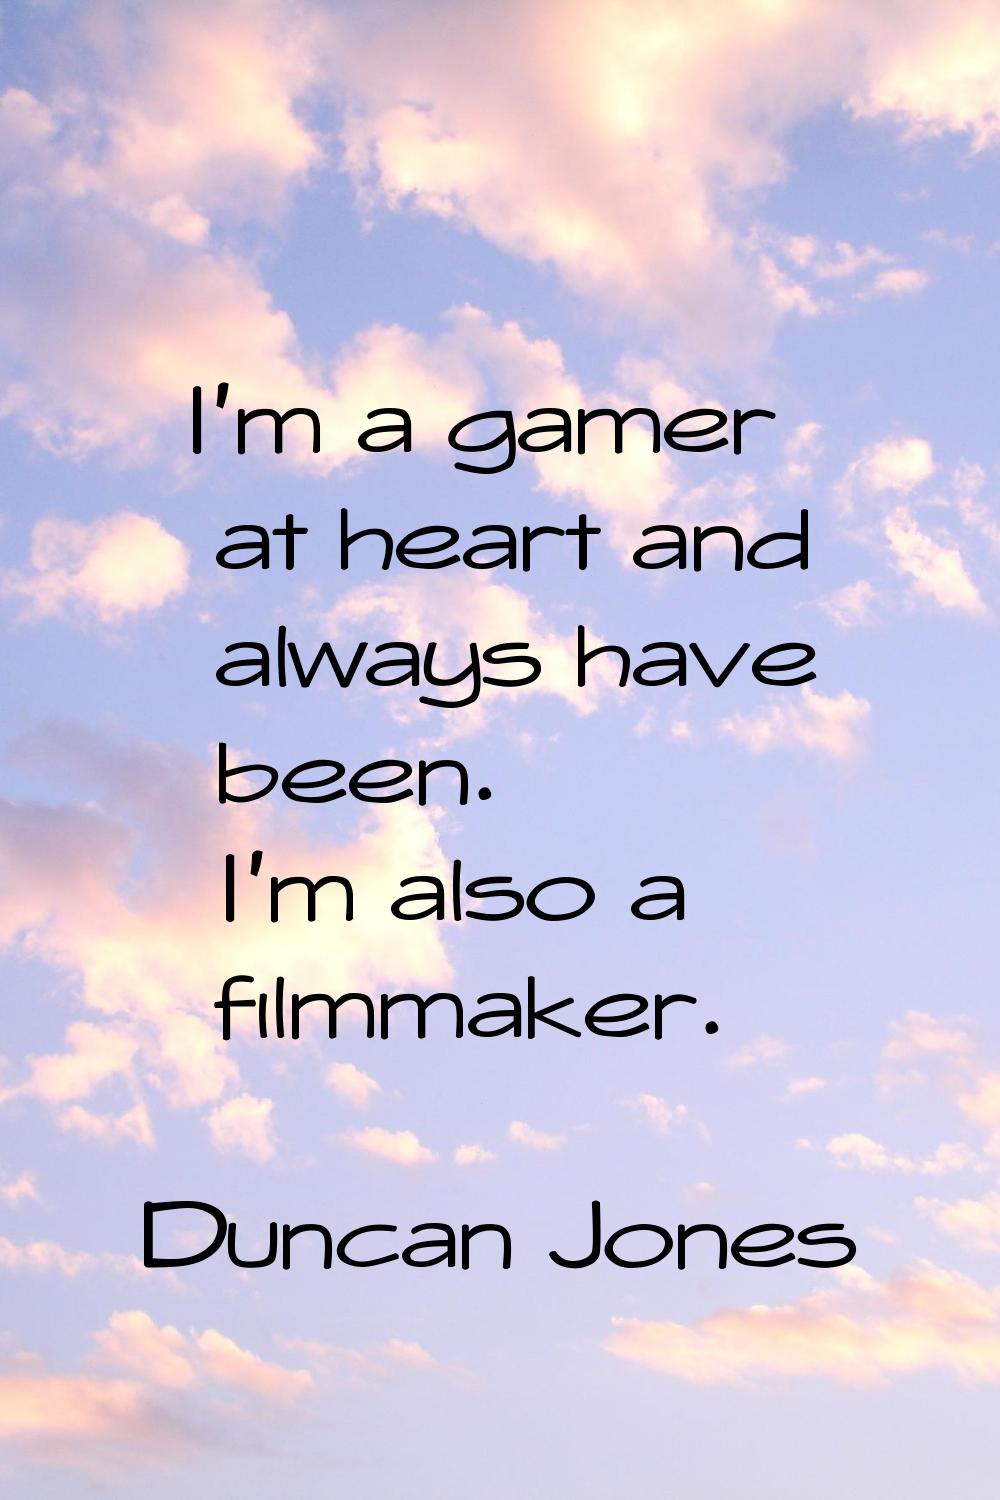 I'm a gamer at heart and always have been. I'm also a filmmaker.